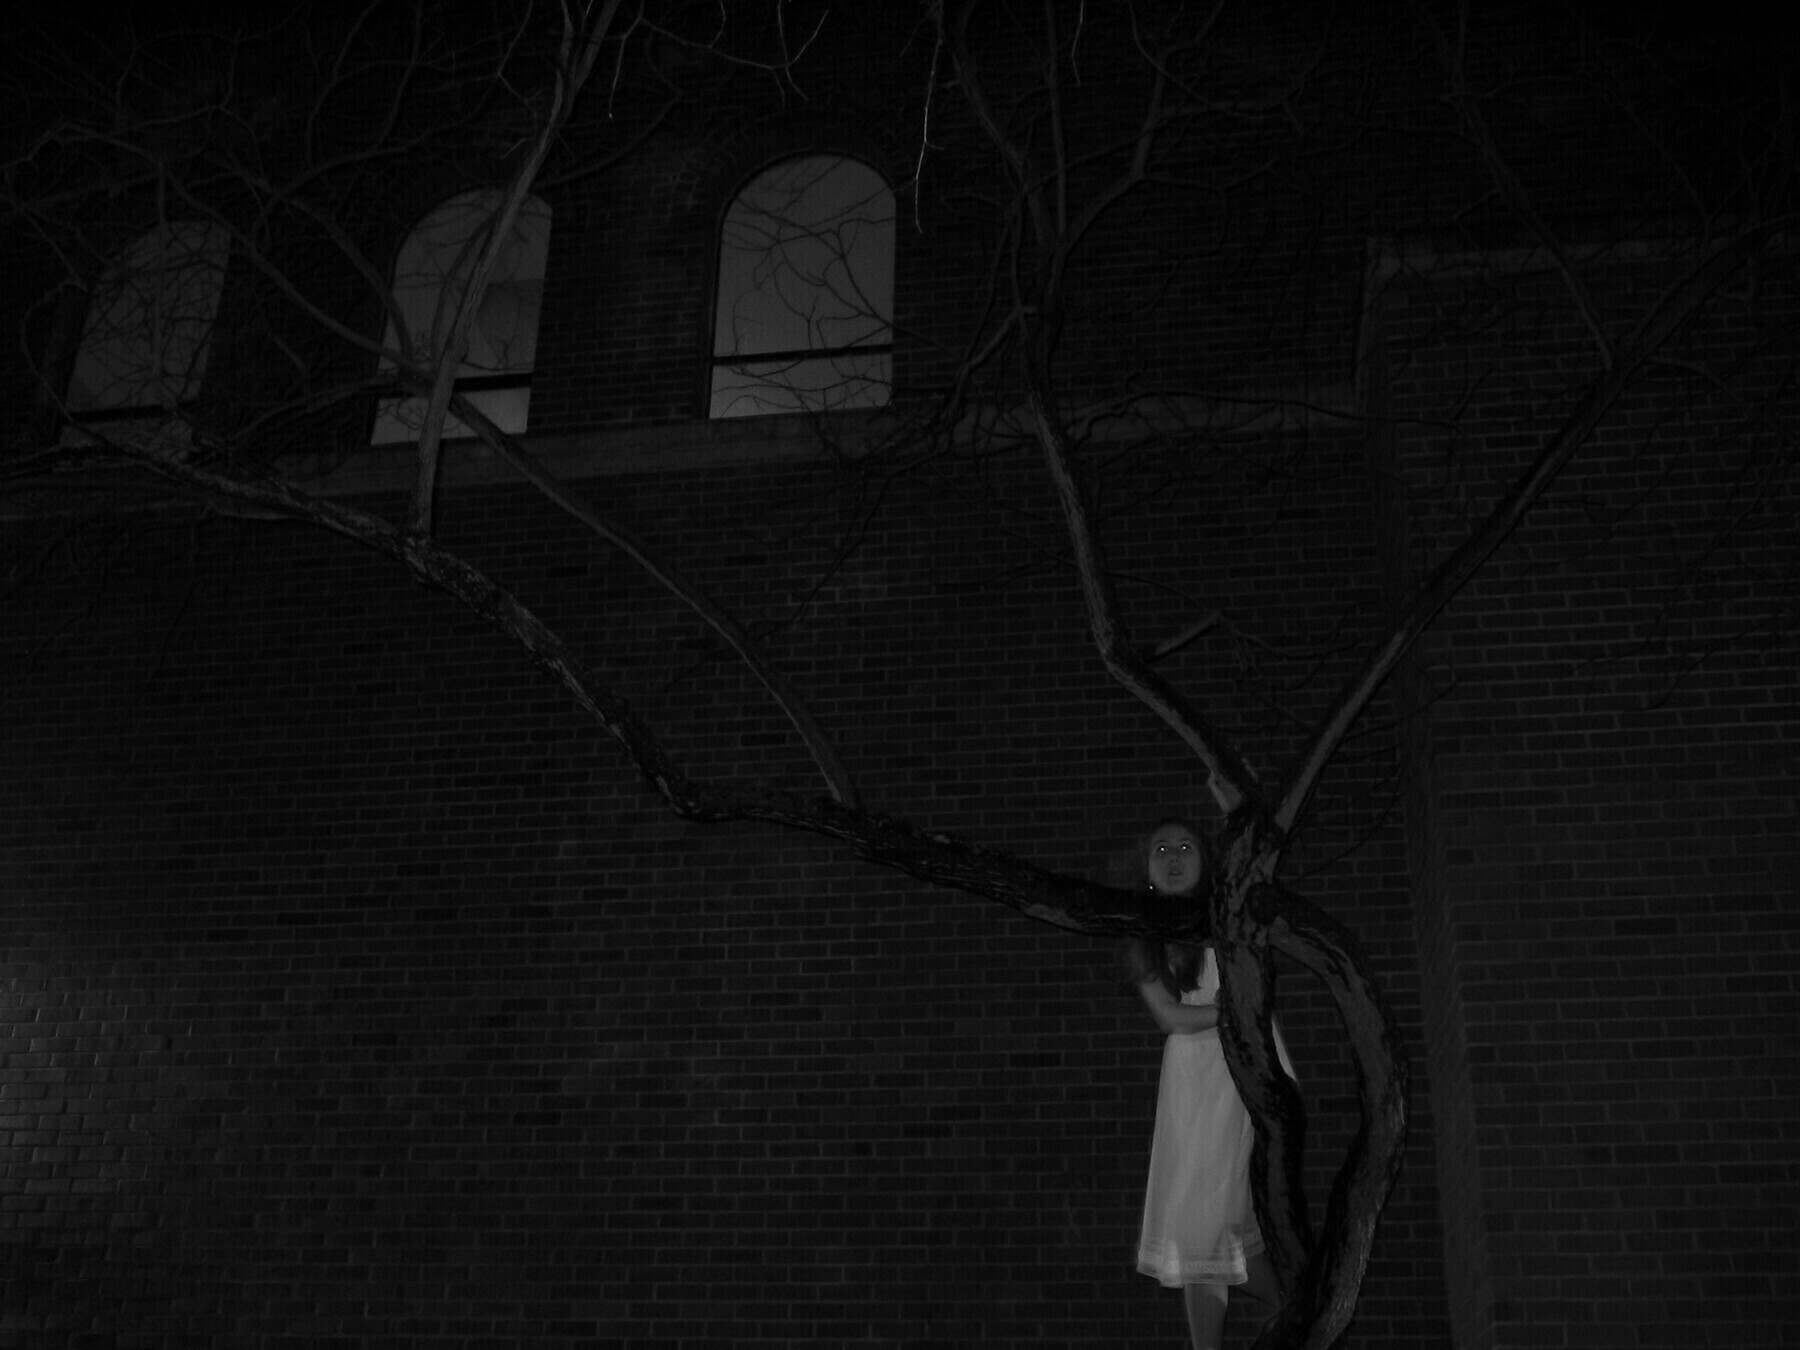 black and white artsy photo of  woman in white perched in a limby tree in front of a brick building with arched windows